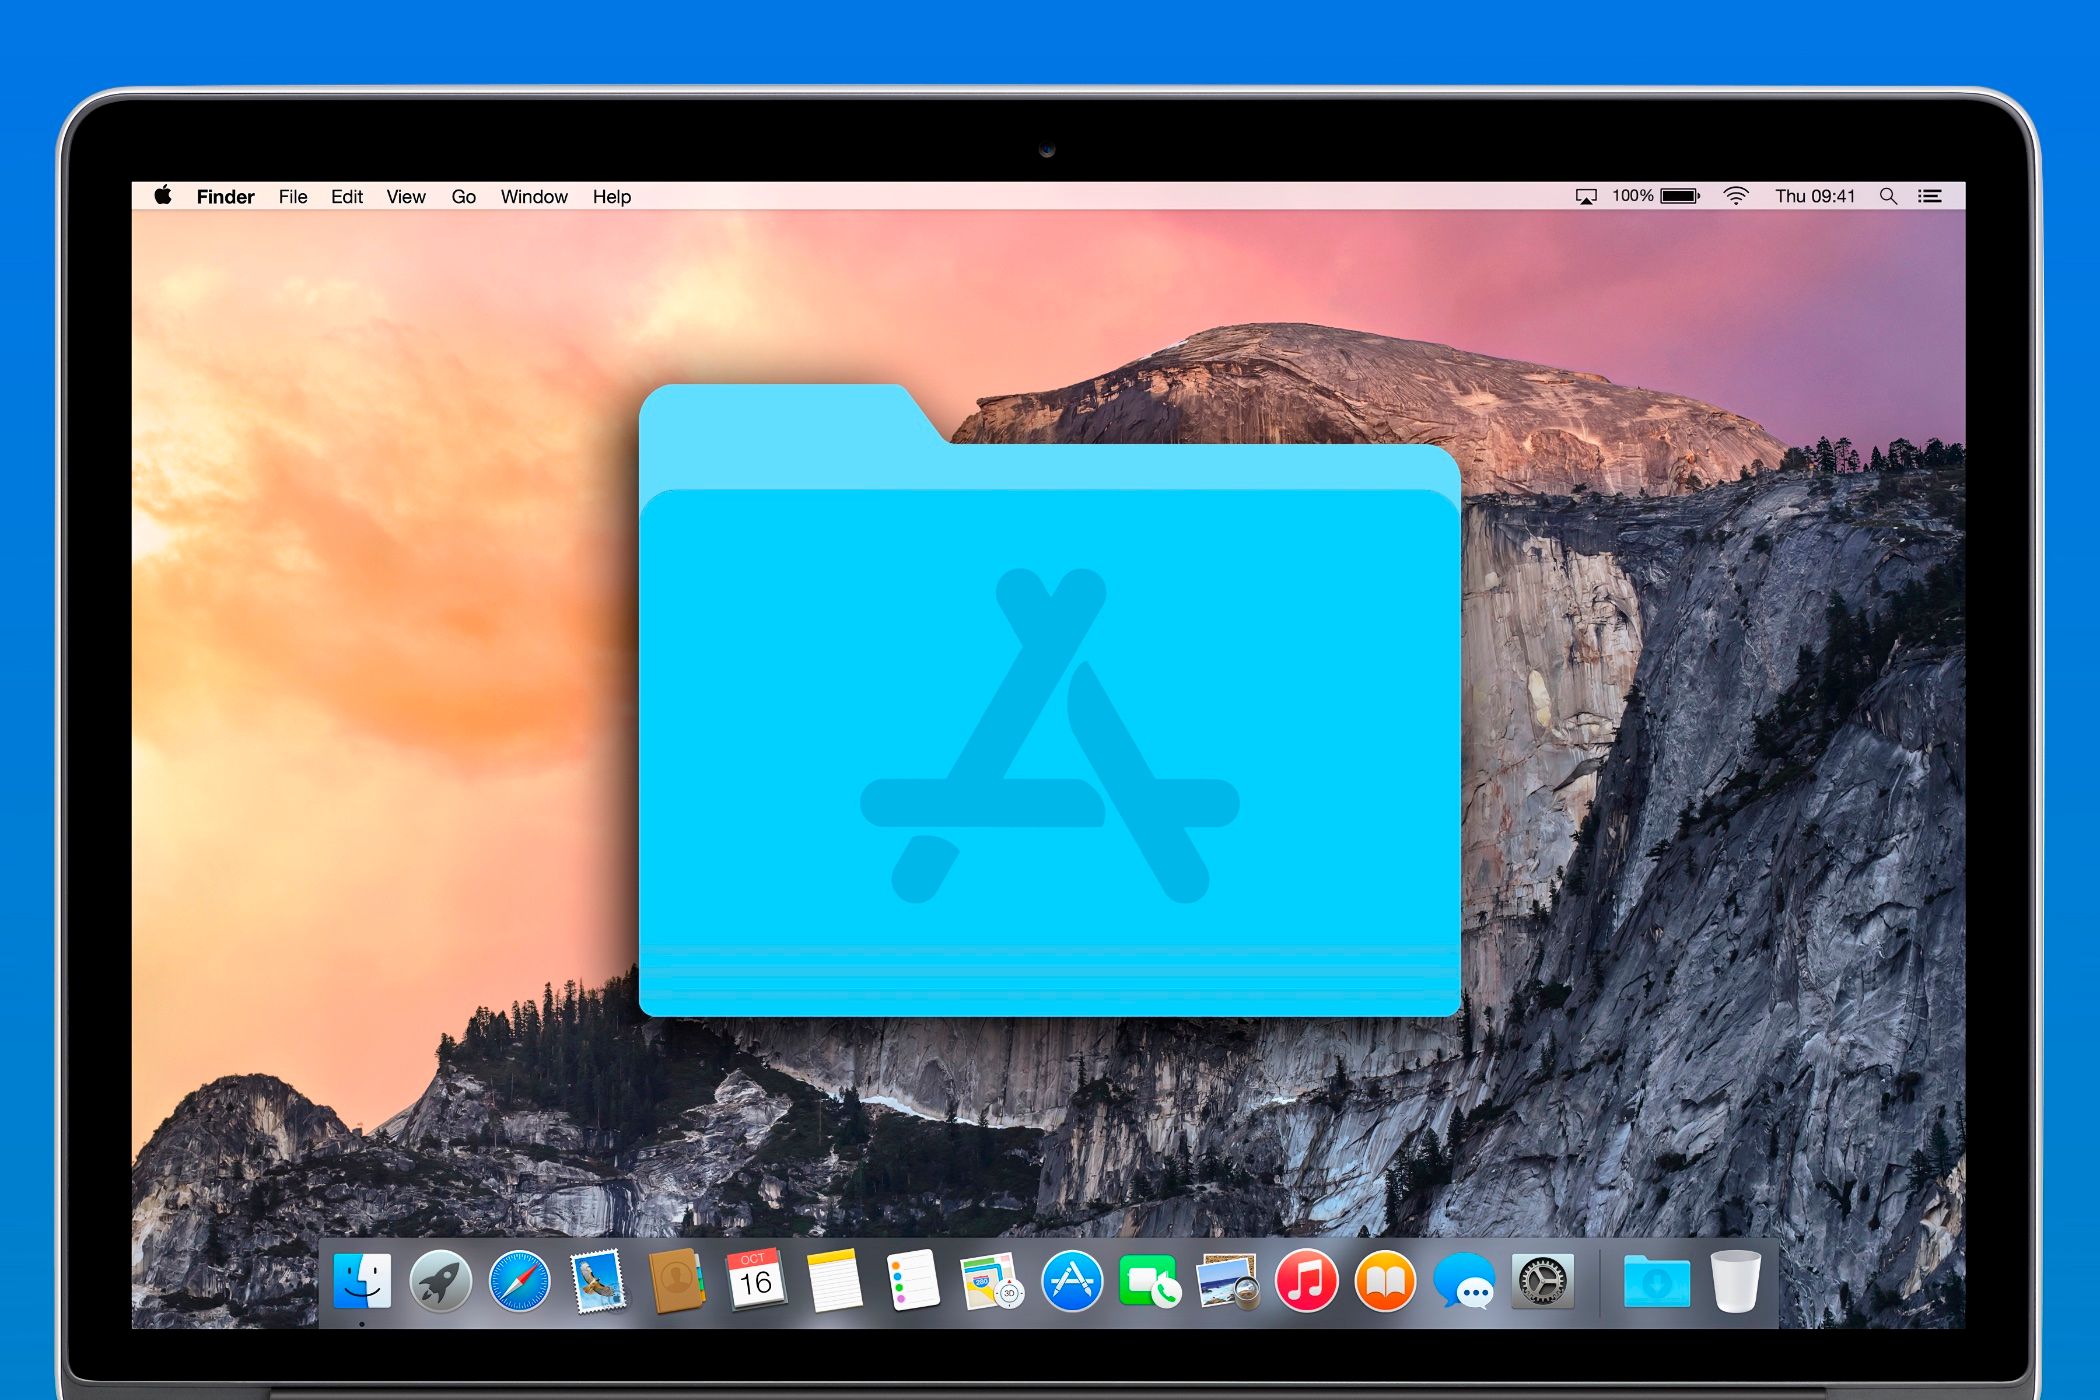 The MacBook home screen with the application folder icon in the center.